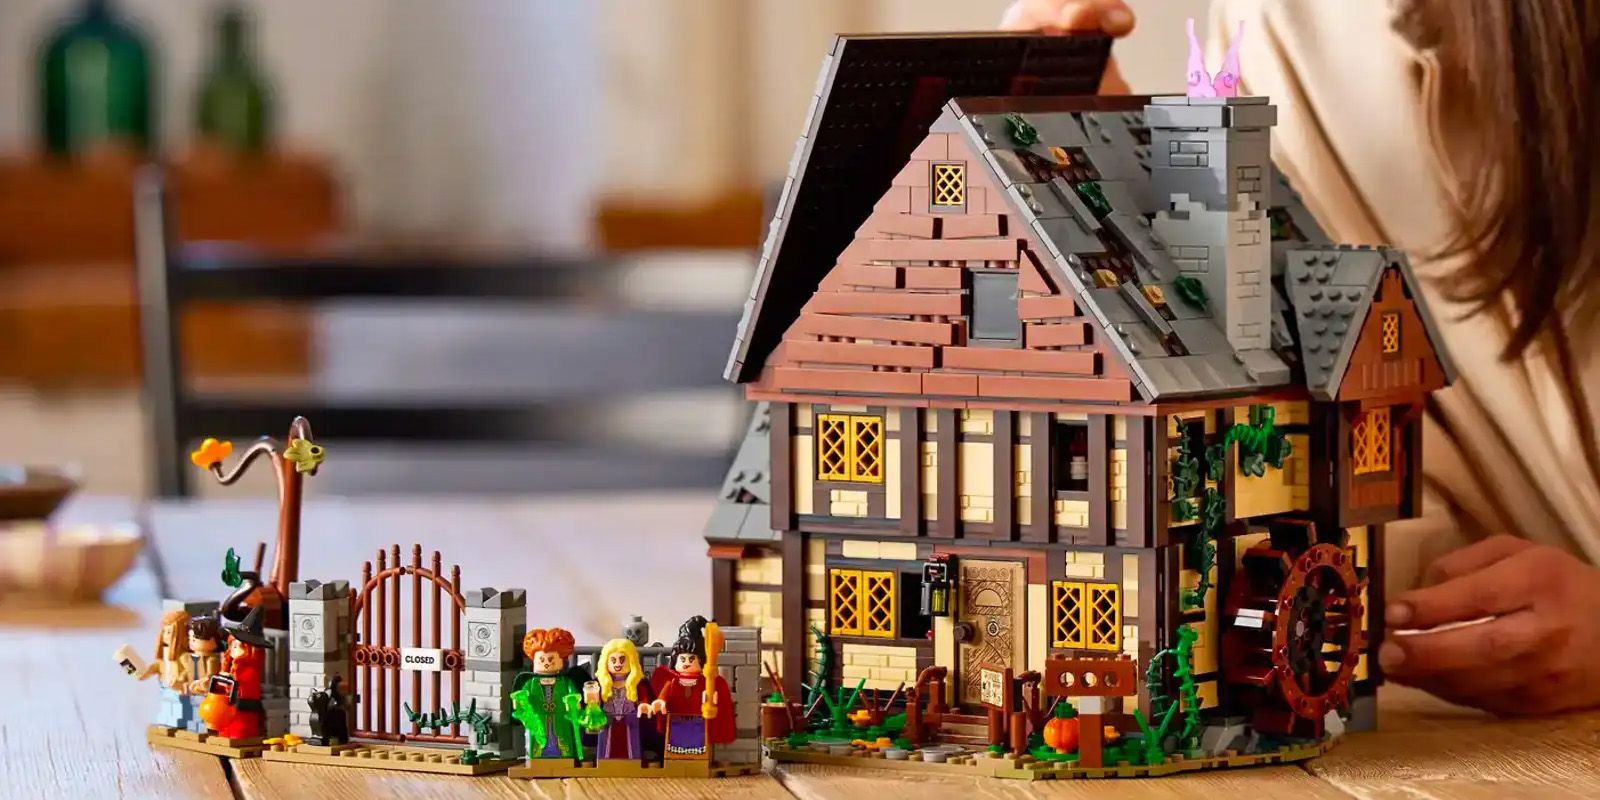 The Sanderson Sisters' cottage in Hocus Pocus gets the LEGO treatment.